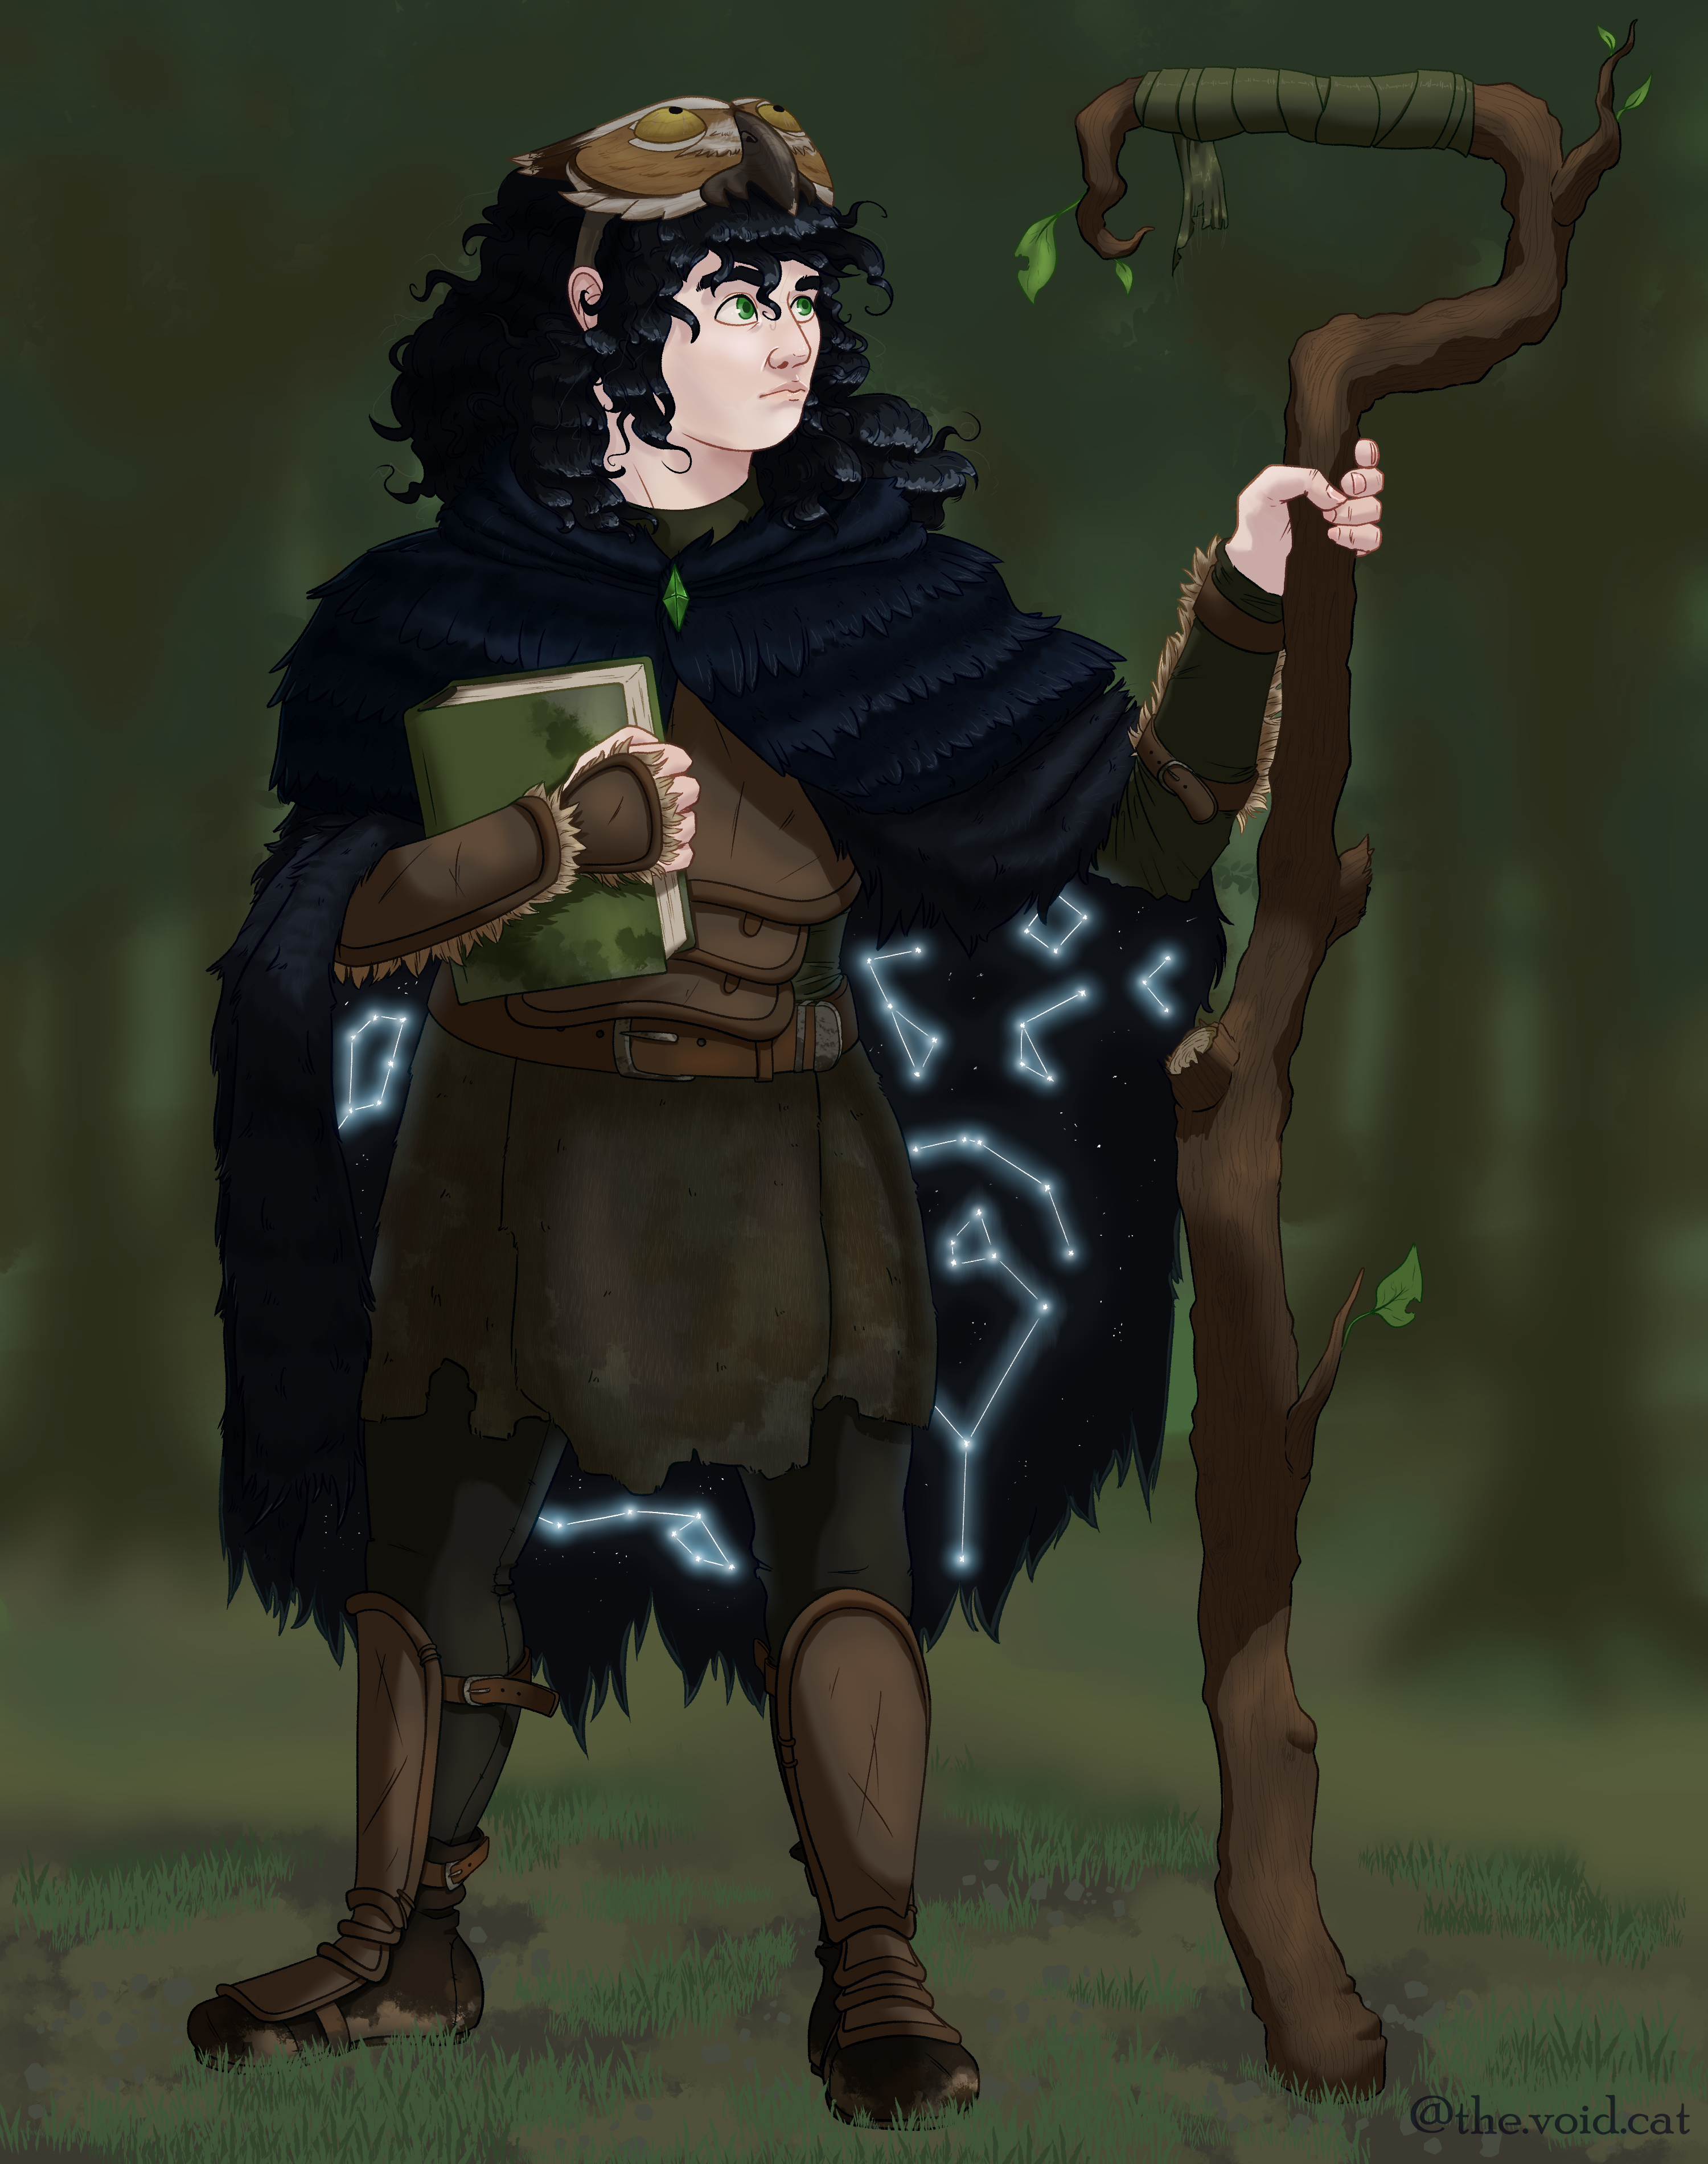 A drawing of Cub, a halfling with pale skin, wild black hair, and bright green eyes. They're wearing a mix of leather and fur armor, and they have a bulky cloak made of thick black fur and shiny black feathers. The inside of the cloak is dappled with glowing blue consteallations. On their head is a mask made to look like a great horned owl's face. They're holding a battered green book to their chest with their right hand. In their left, they hold a staff made from a tree branch with a cloth-wrapped landing perch made for a large bird at the top.